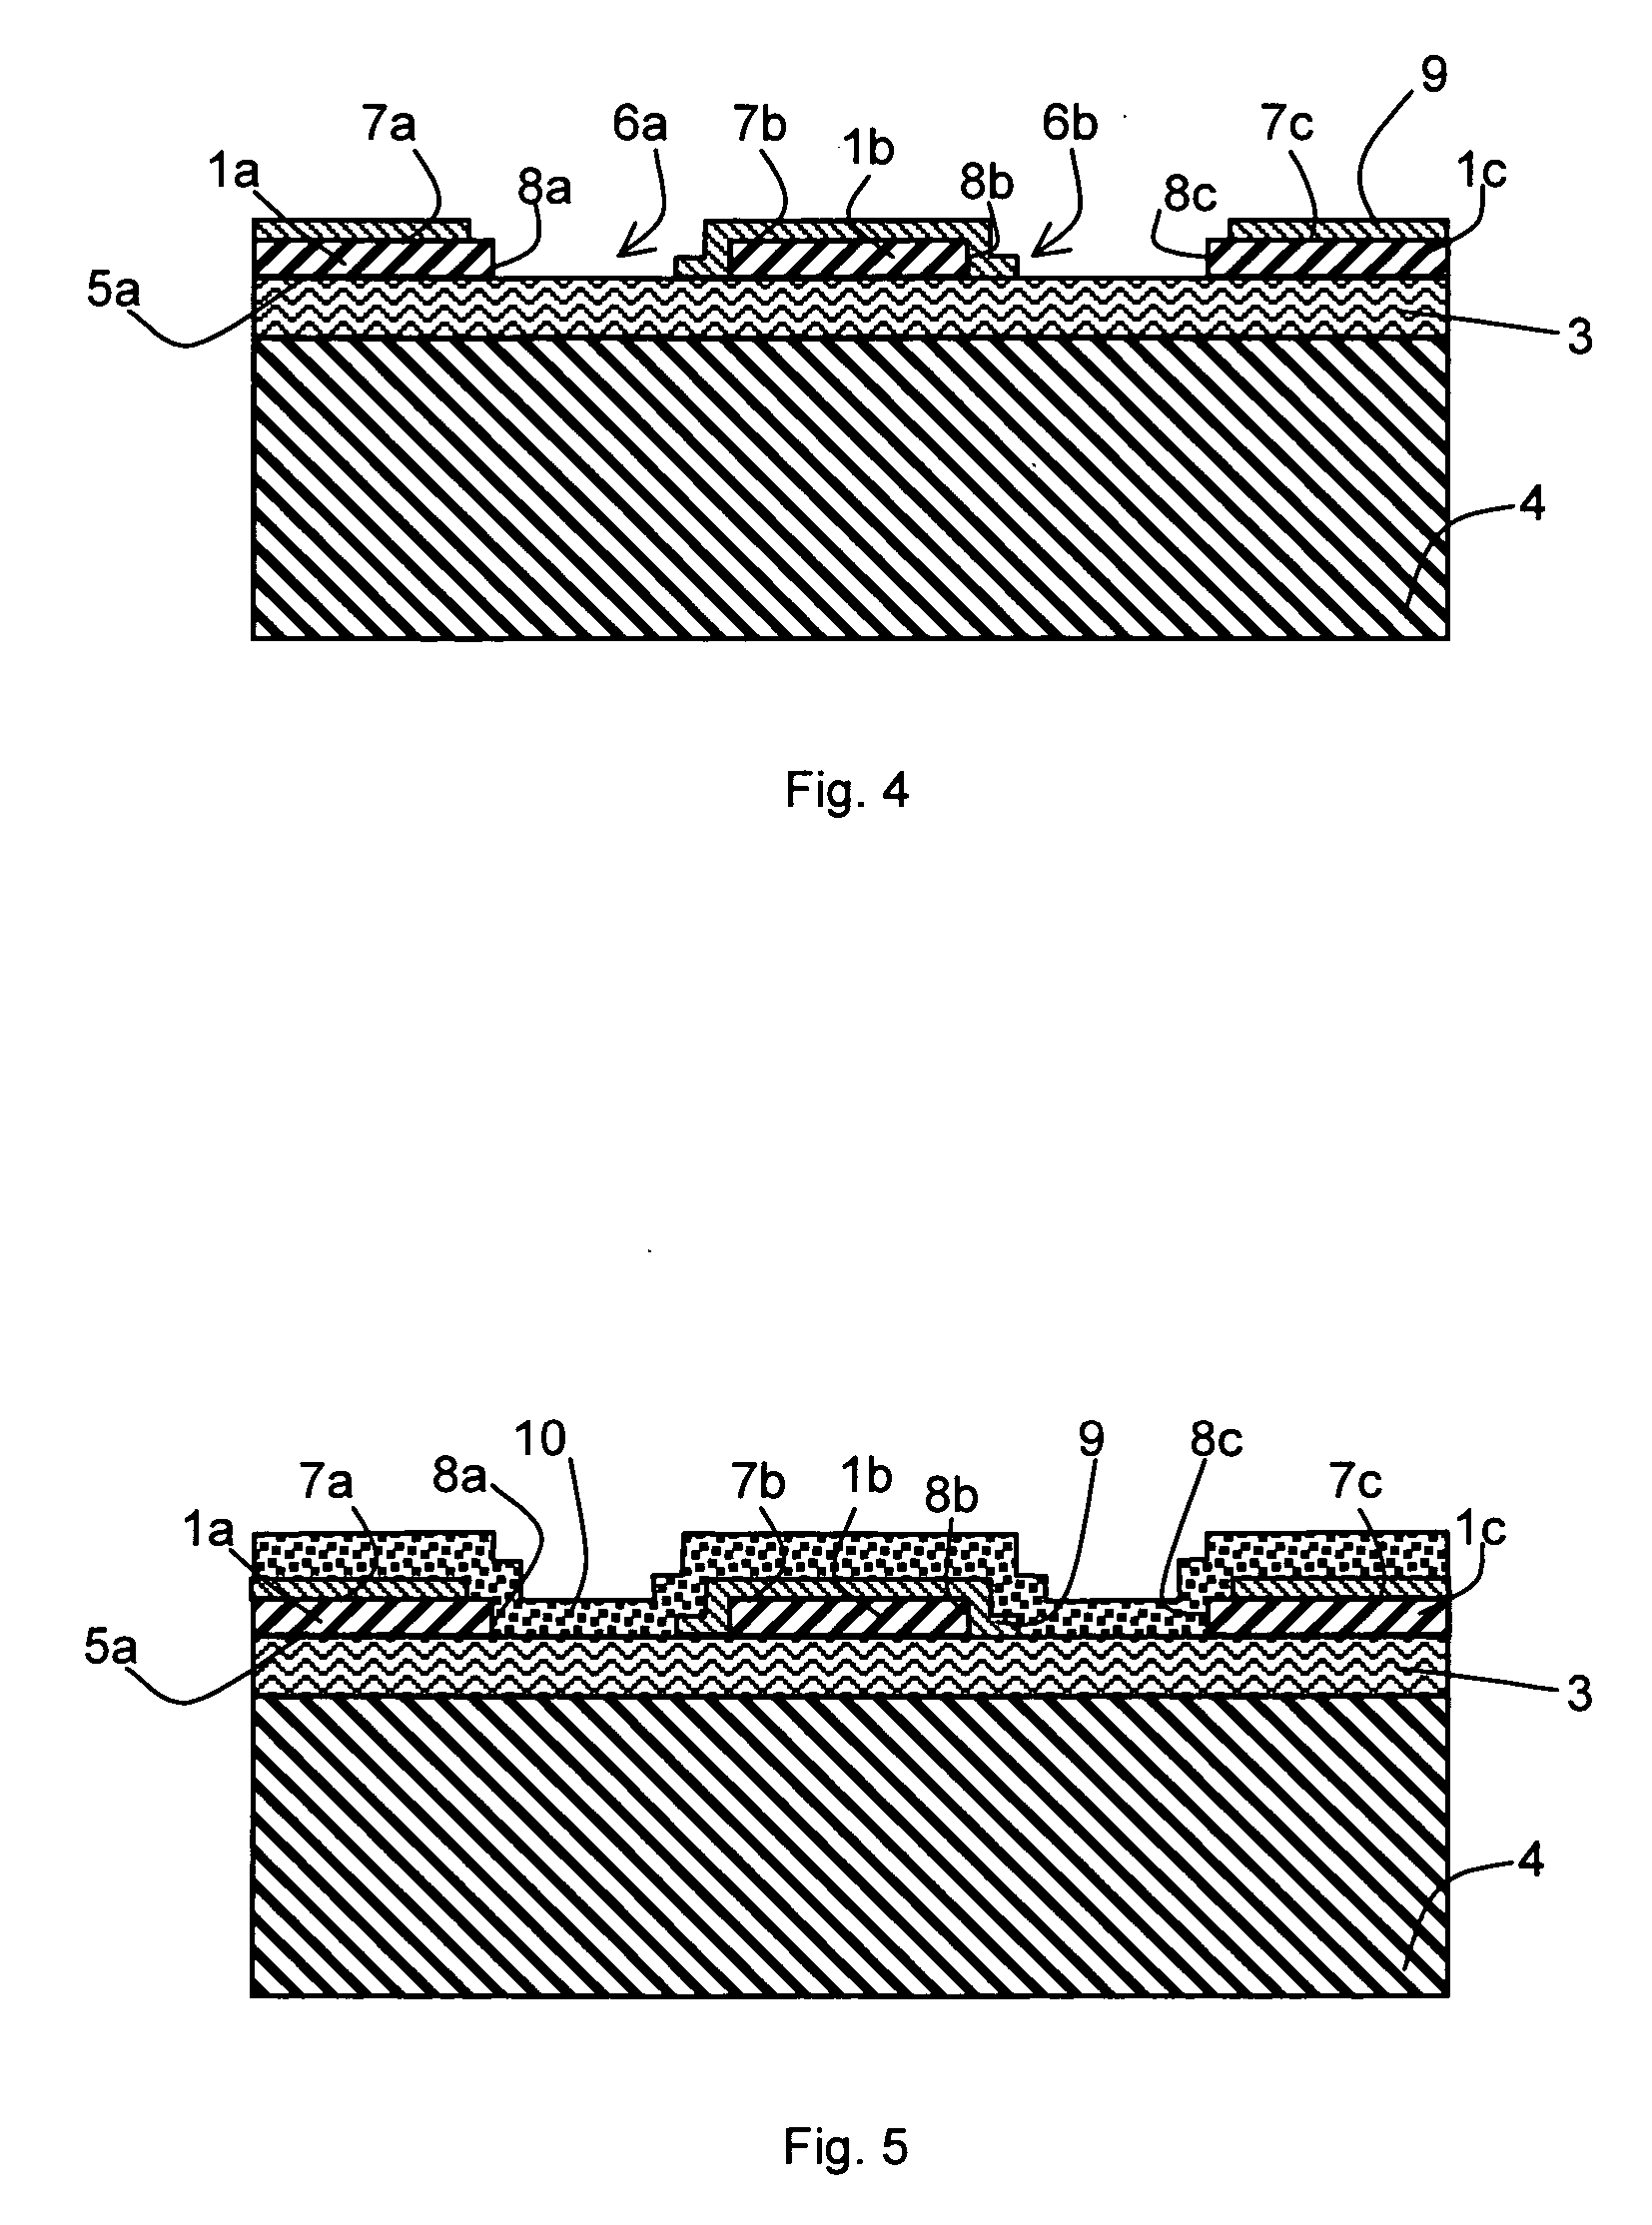 Method for producing distinct first and second active semi-conducting zones and use thereof for fabricating C-MOS structures